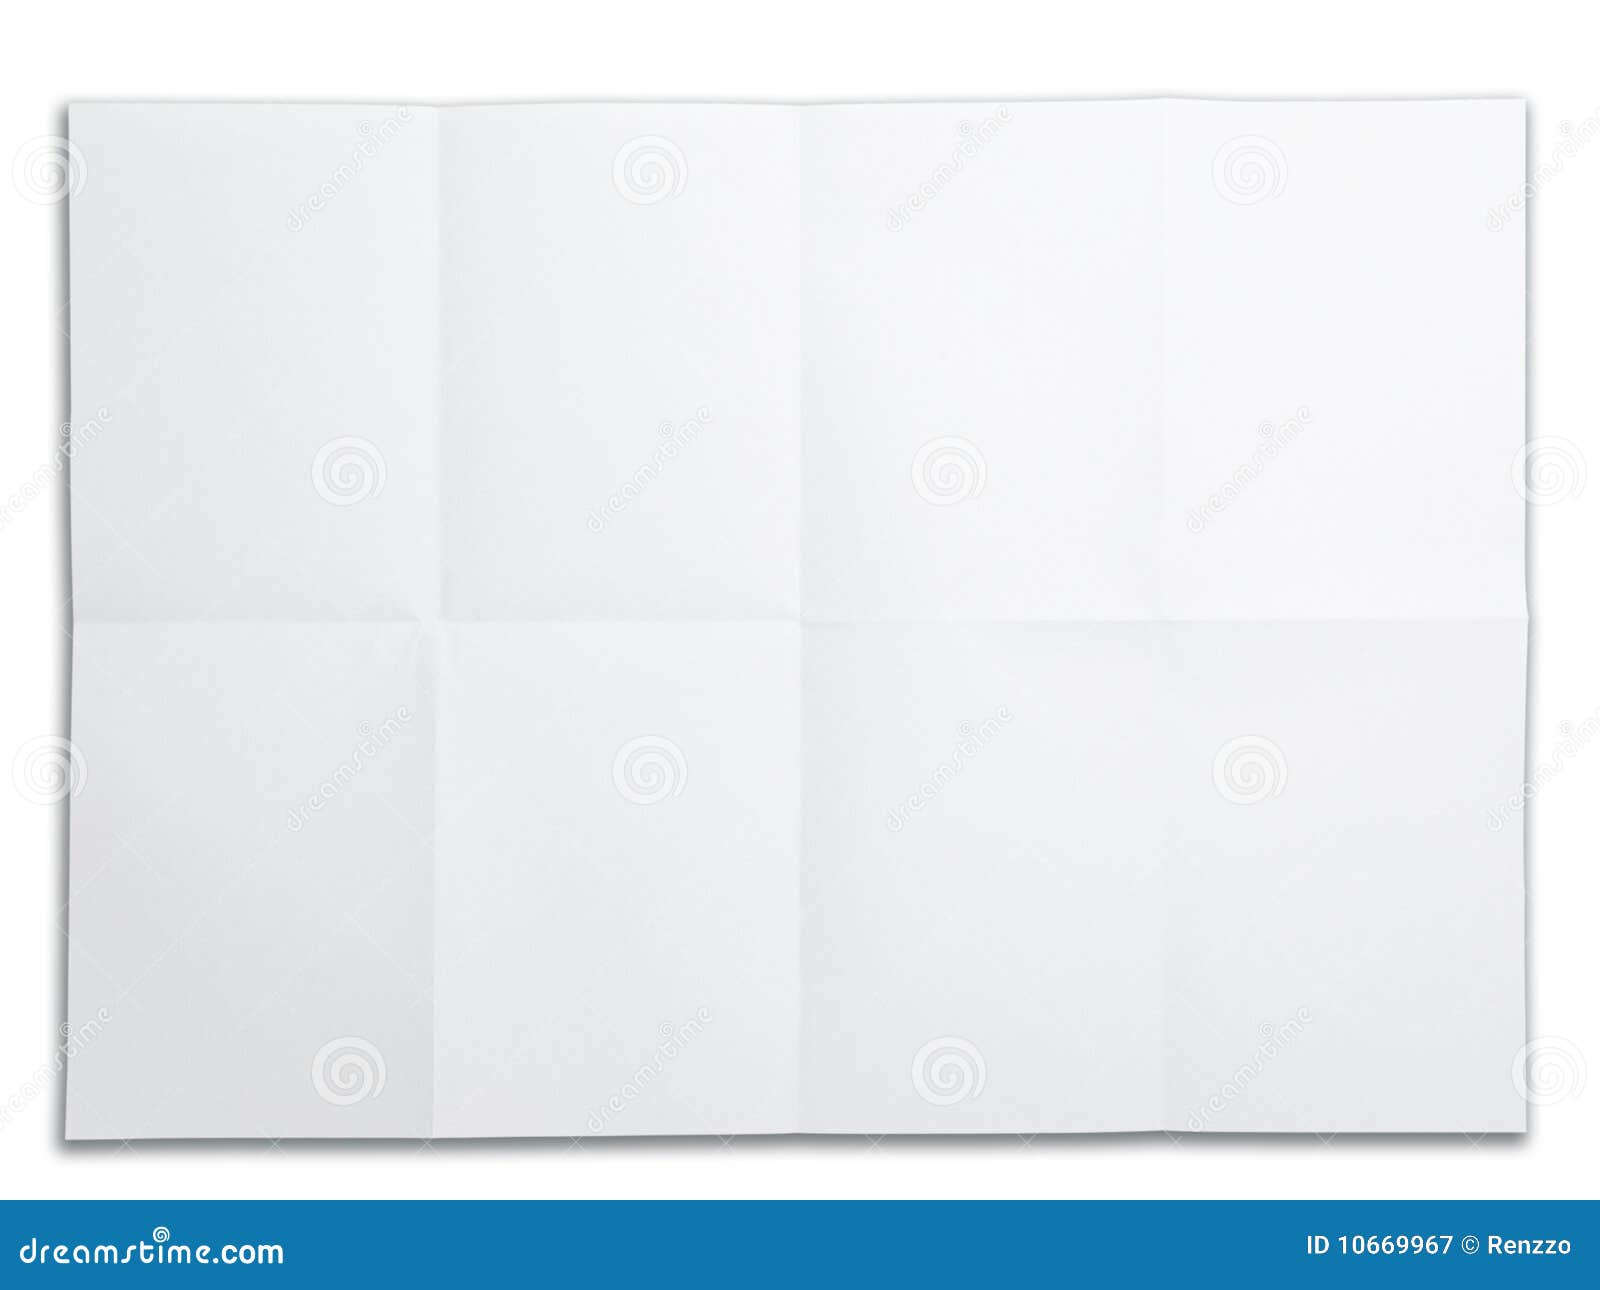 blank paper with fold mark.  on white.